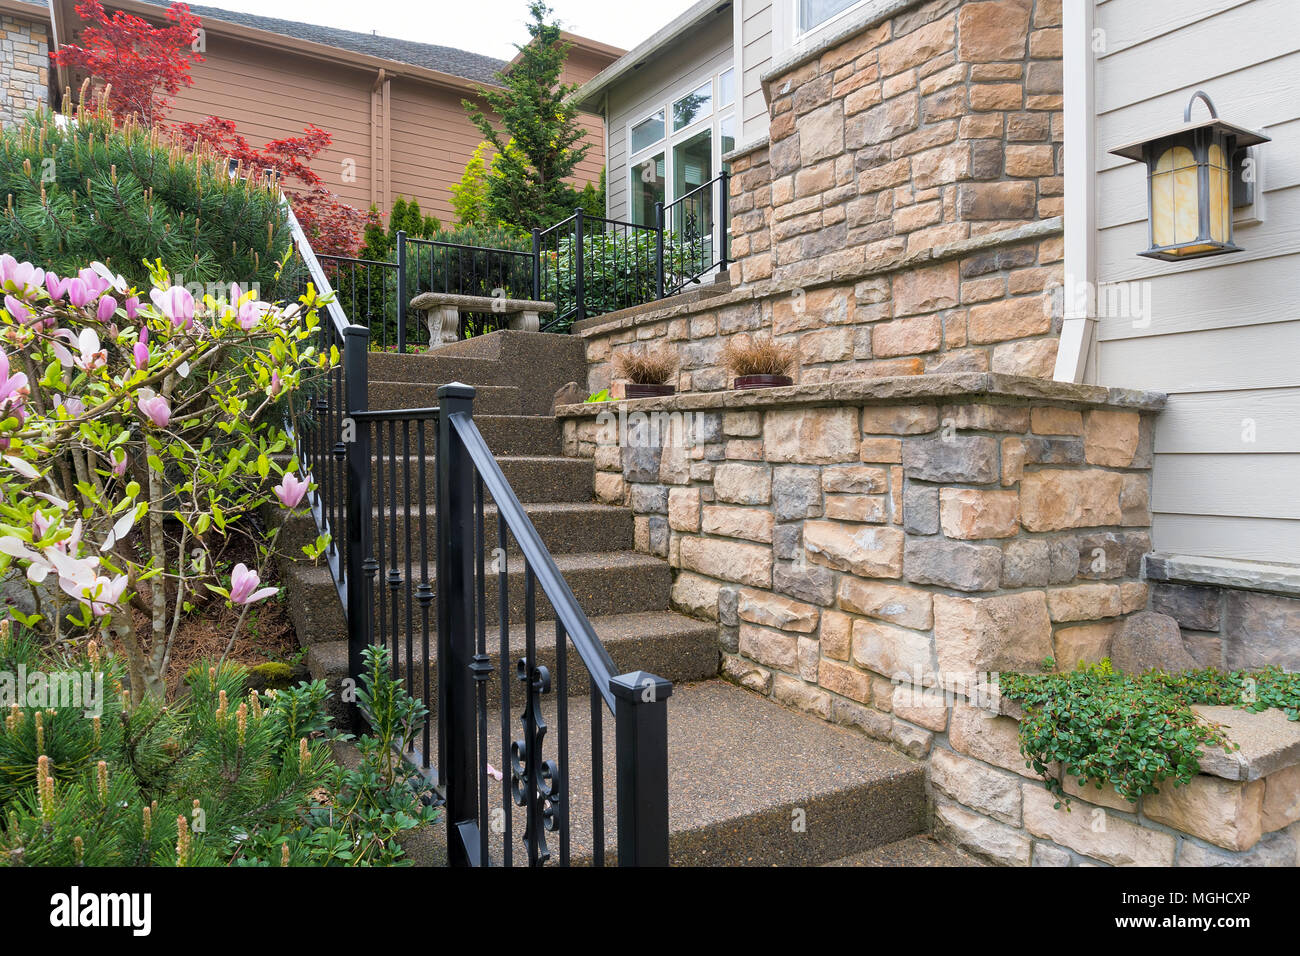 House front entry with concrete stairs iron rod railings stone wall planter siding by frontyard garden Stock Photo